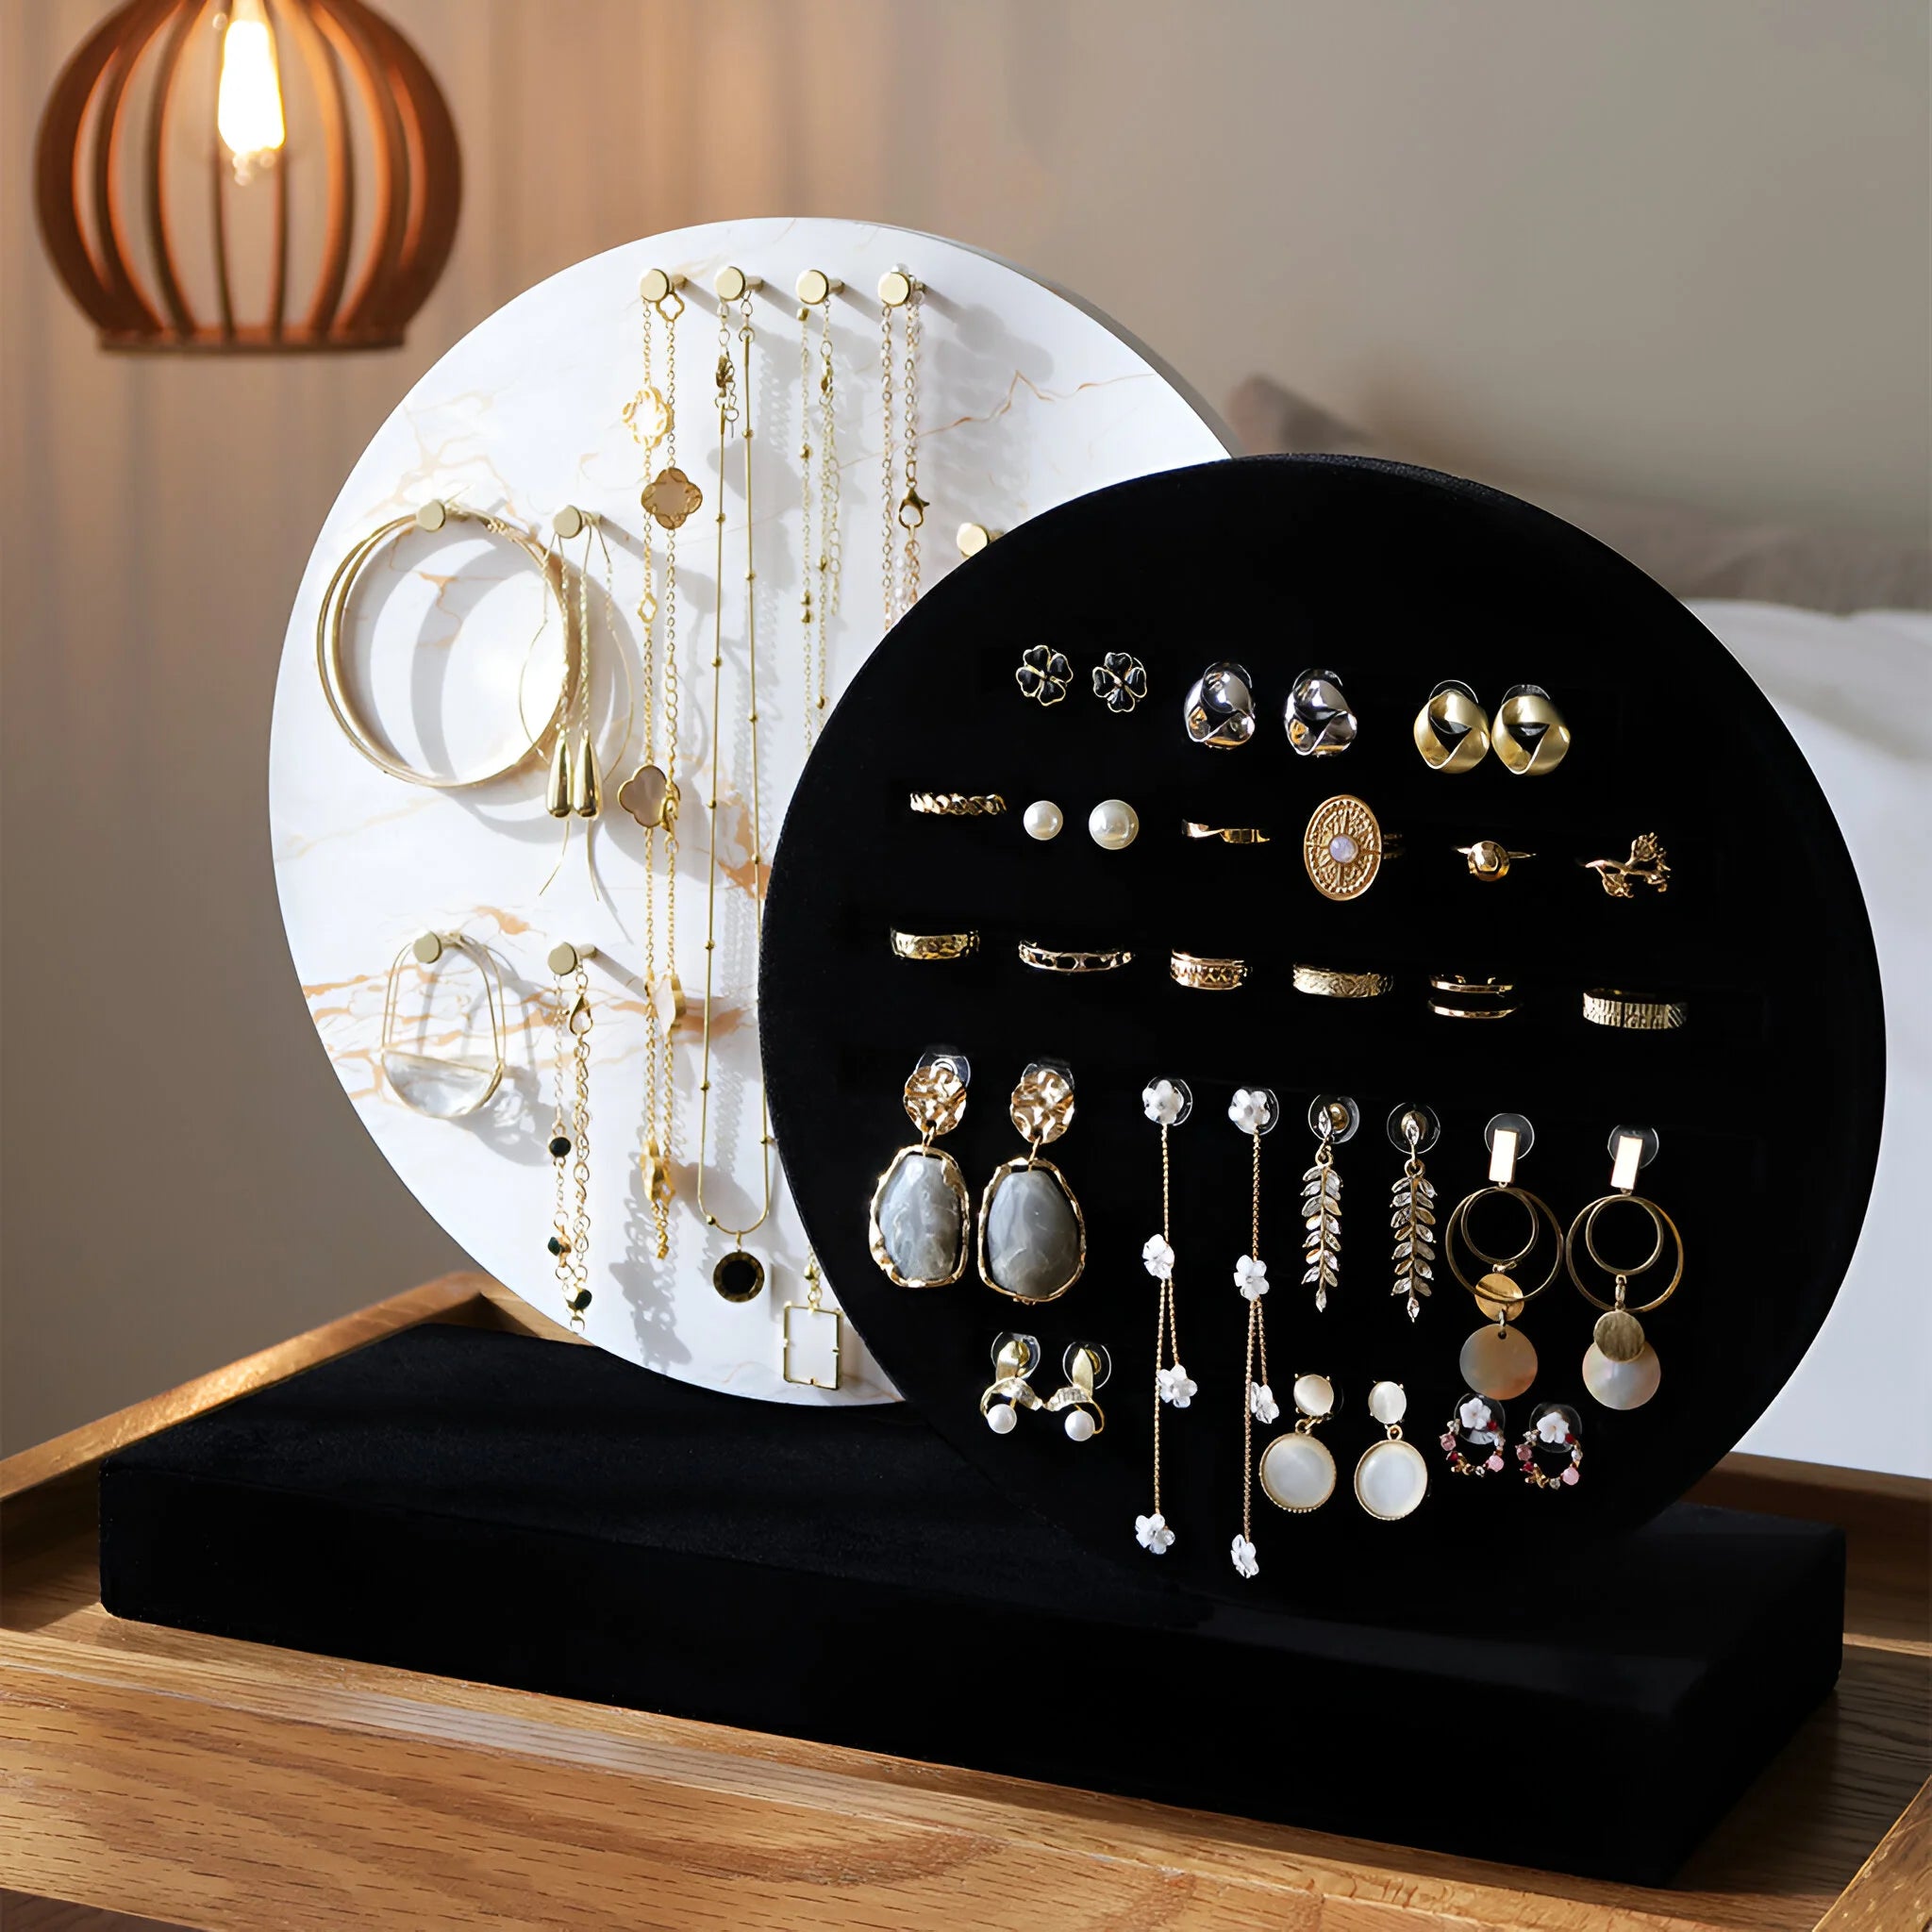 Amazon.com: Qingsm 5-Tier Rotating 220-Hole Earring Holder Organizer,Metal  Adjustable Jewelry Organizer Display Stand Hanging Towers : Clothing, Shoes  & Jewelry